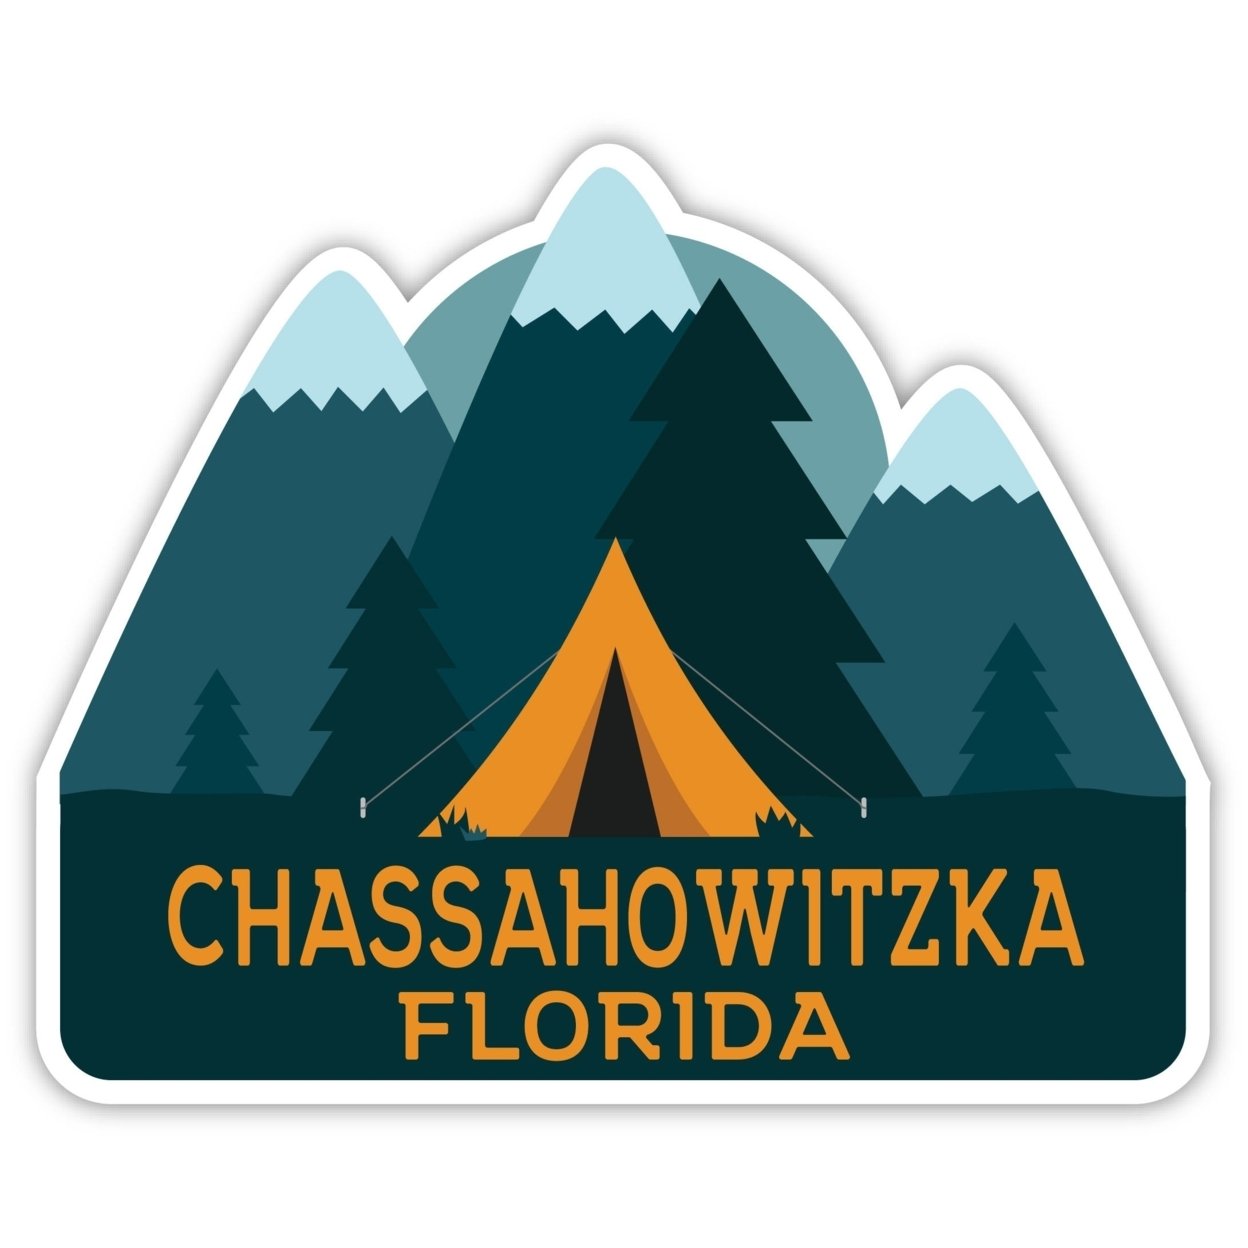 Chassahowitzka Florida Souvenir Decorative Stickers (Choose Theme And Size) - 4-Pack, 8-Inch, Tent